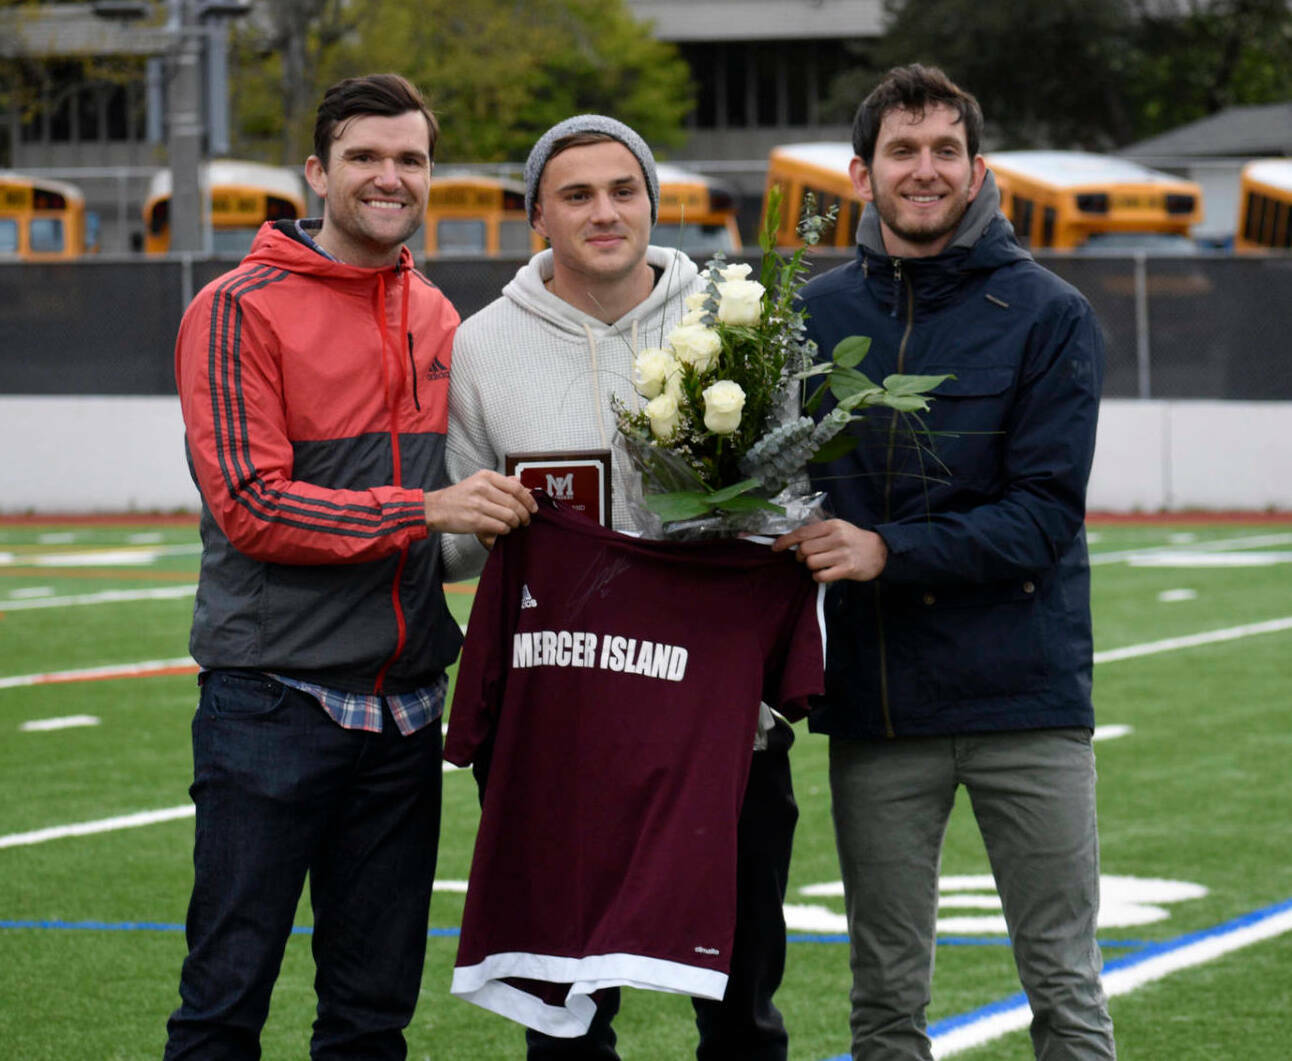 Former Mercer Island High School boys soccer head coach Colin Rigby, left, Jordan Morris, center, and former Islanders boys soccer head coach Forrest Marowitz pose for a quick photo on April 23, 2019, at Islander Stadium. Morris was inducted into the Mercer Island High School Athletic Hall of Fame. Photo courtesy of Kim Otte